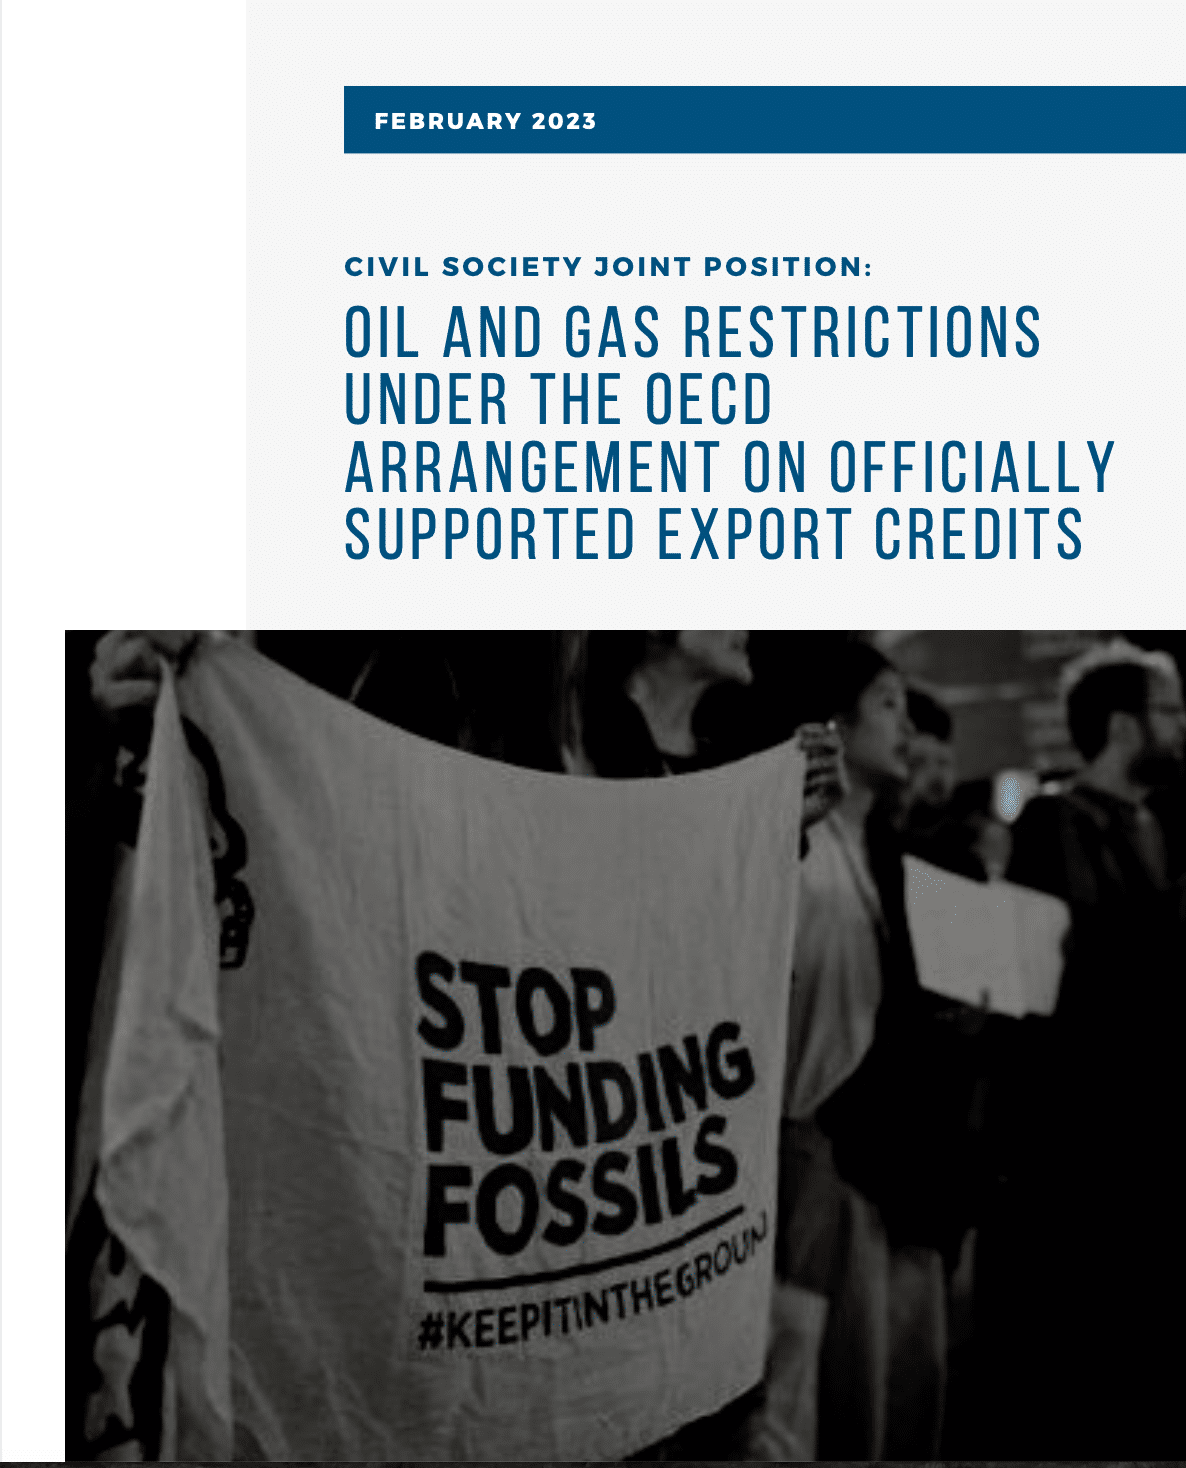 Oil and Gas Restrictions under the OECD Arrangement on Officially Supported Export Credits